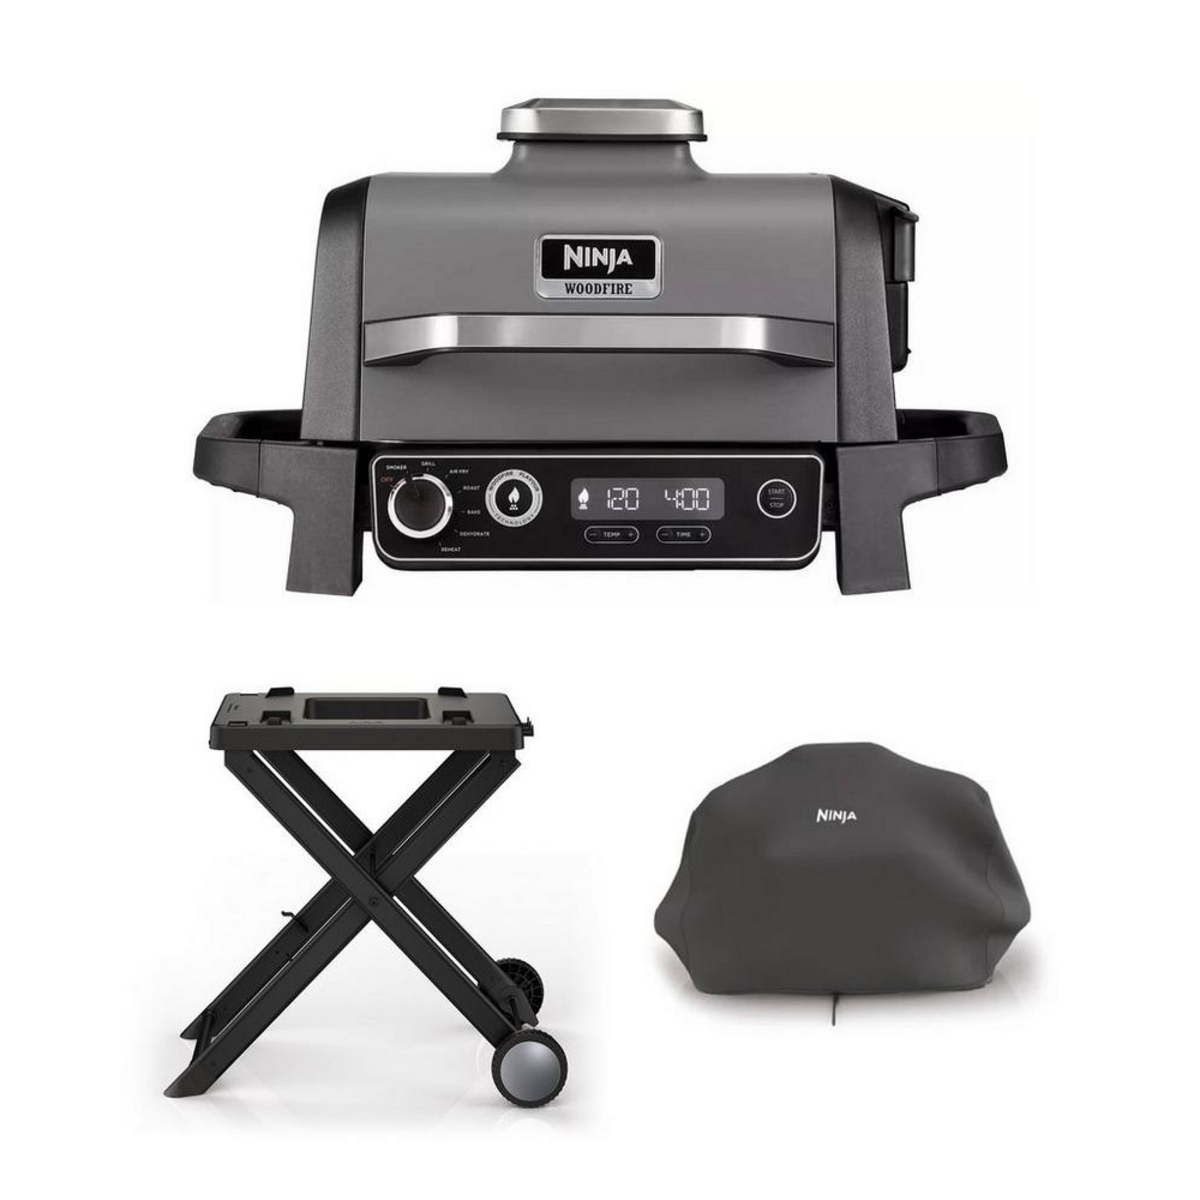 Ninja OG701UKGRILLKIT Woodfire Electric BBQ Grill amp Smoker CoverStand